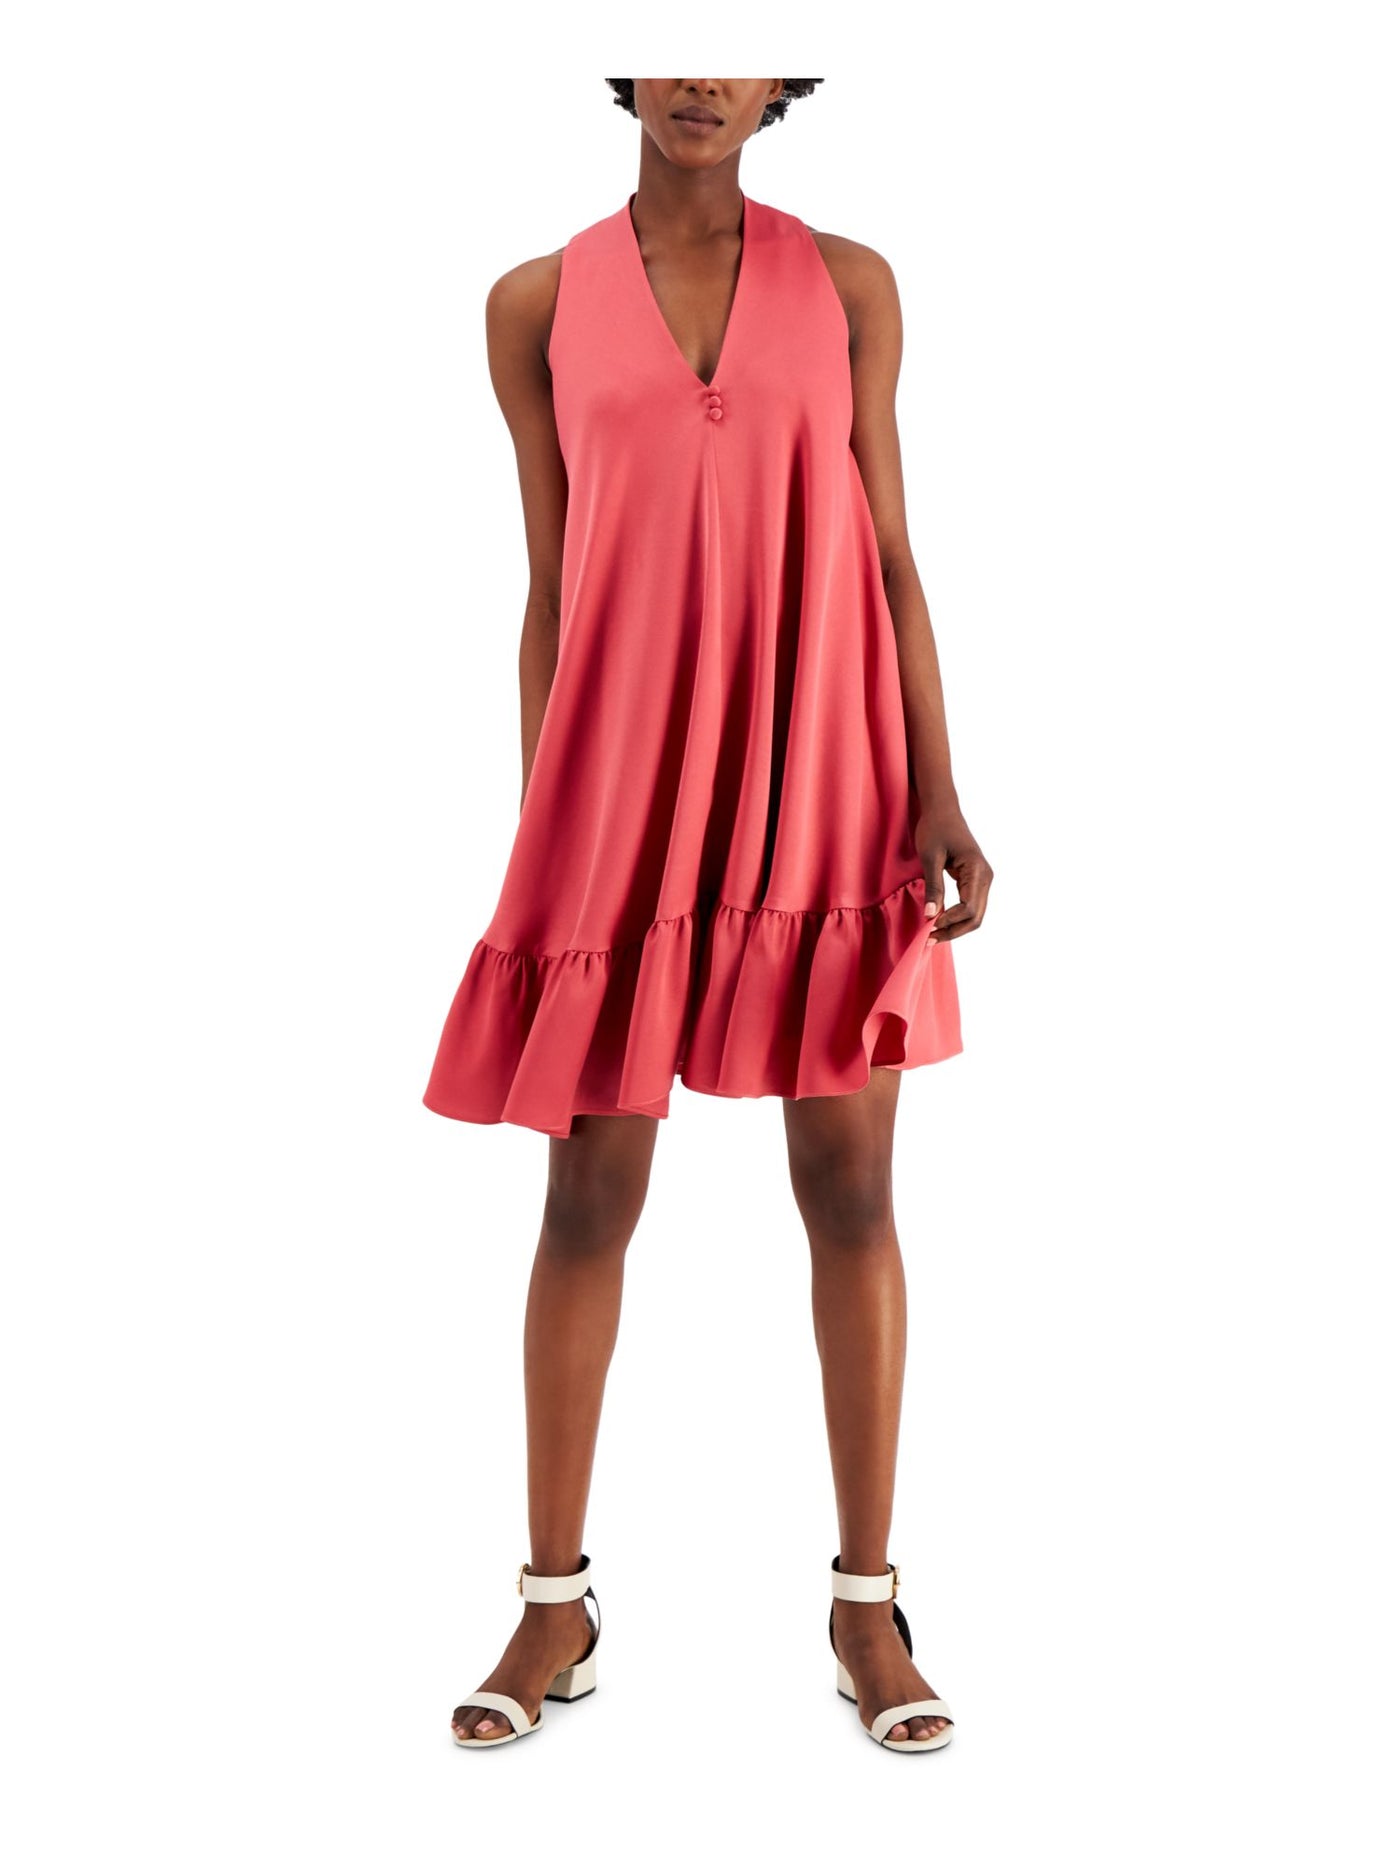 TAYLOR Womens Coral Sleeveless V Neck Short Party Trapeze Dress 16